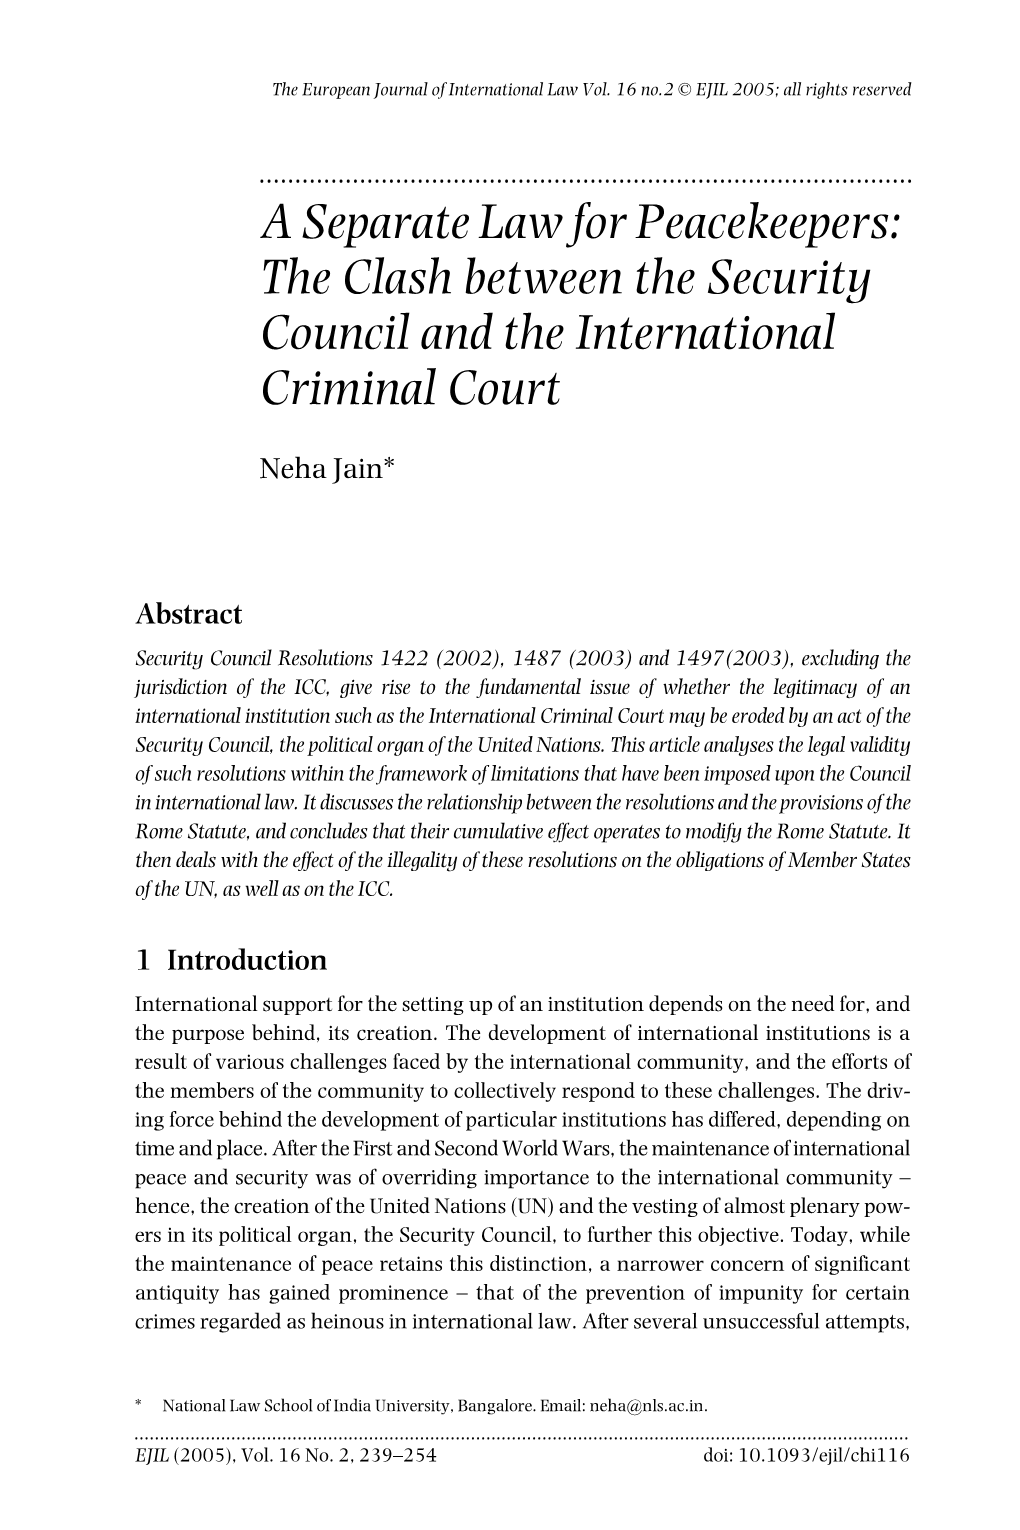 The Clash Between the Security Council and the International Criminal Court